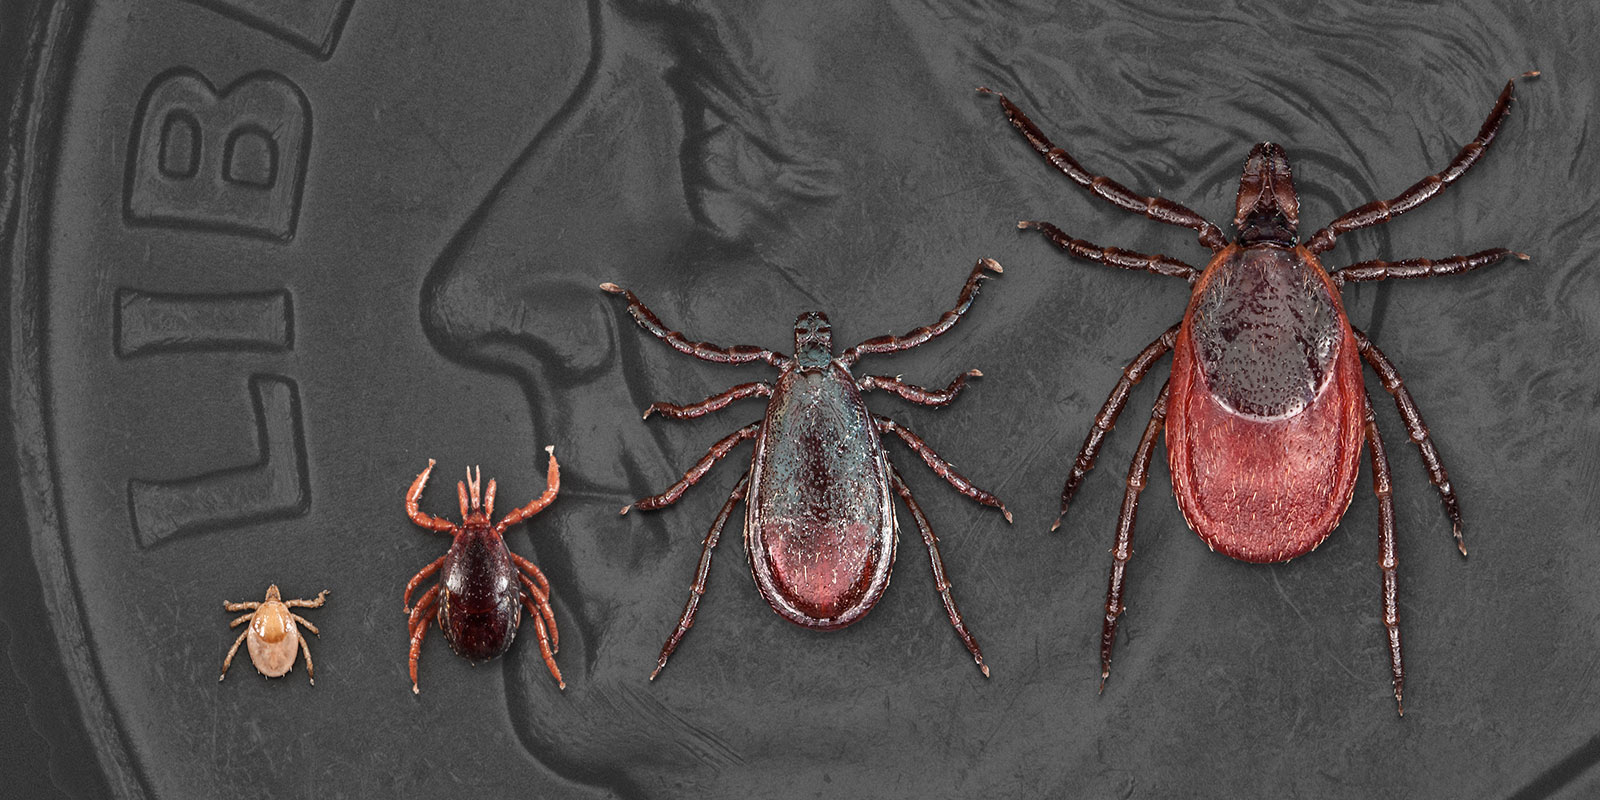 Tick life stages